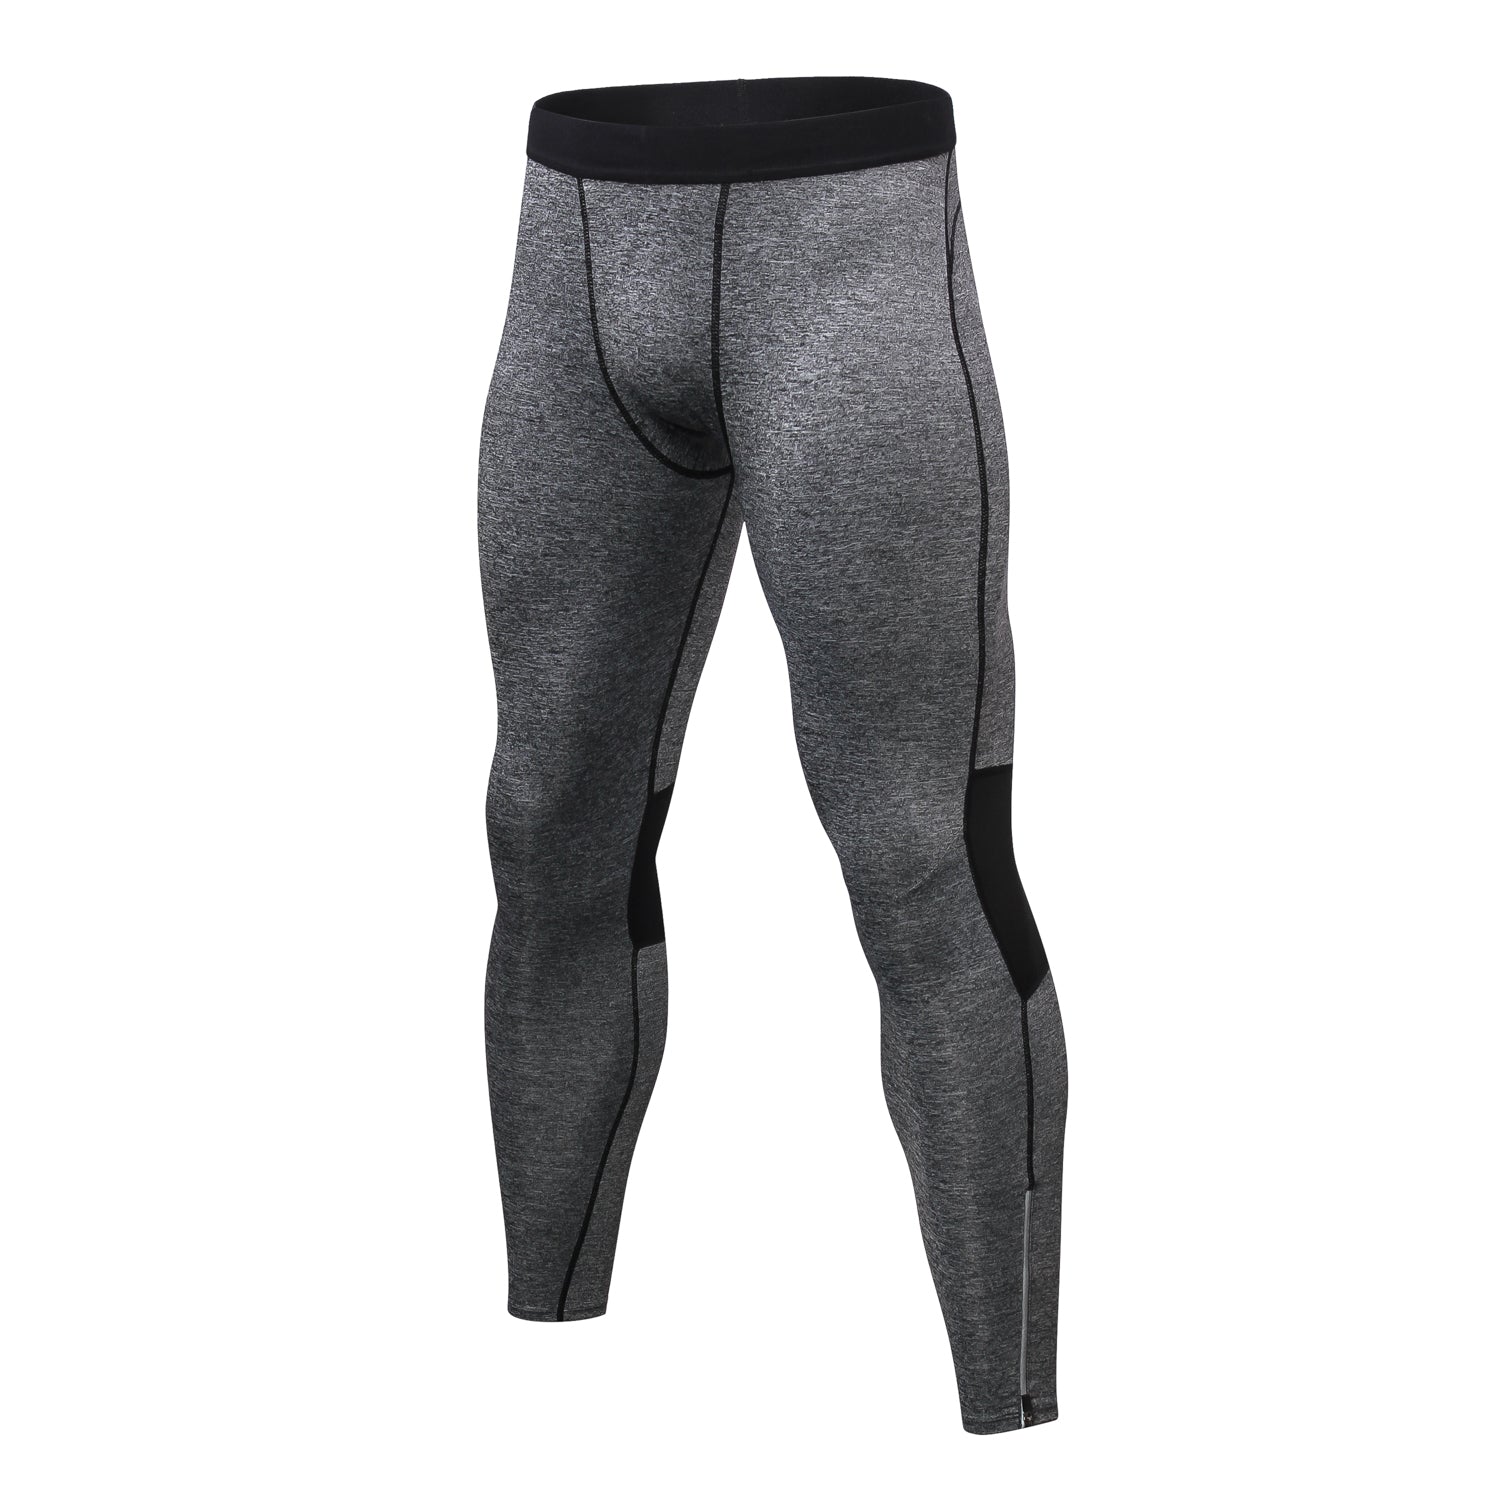 Men's Compression Under Base Layer Sports Workout Legging Trousers